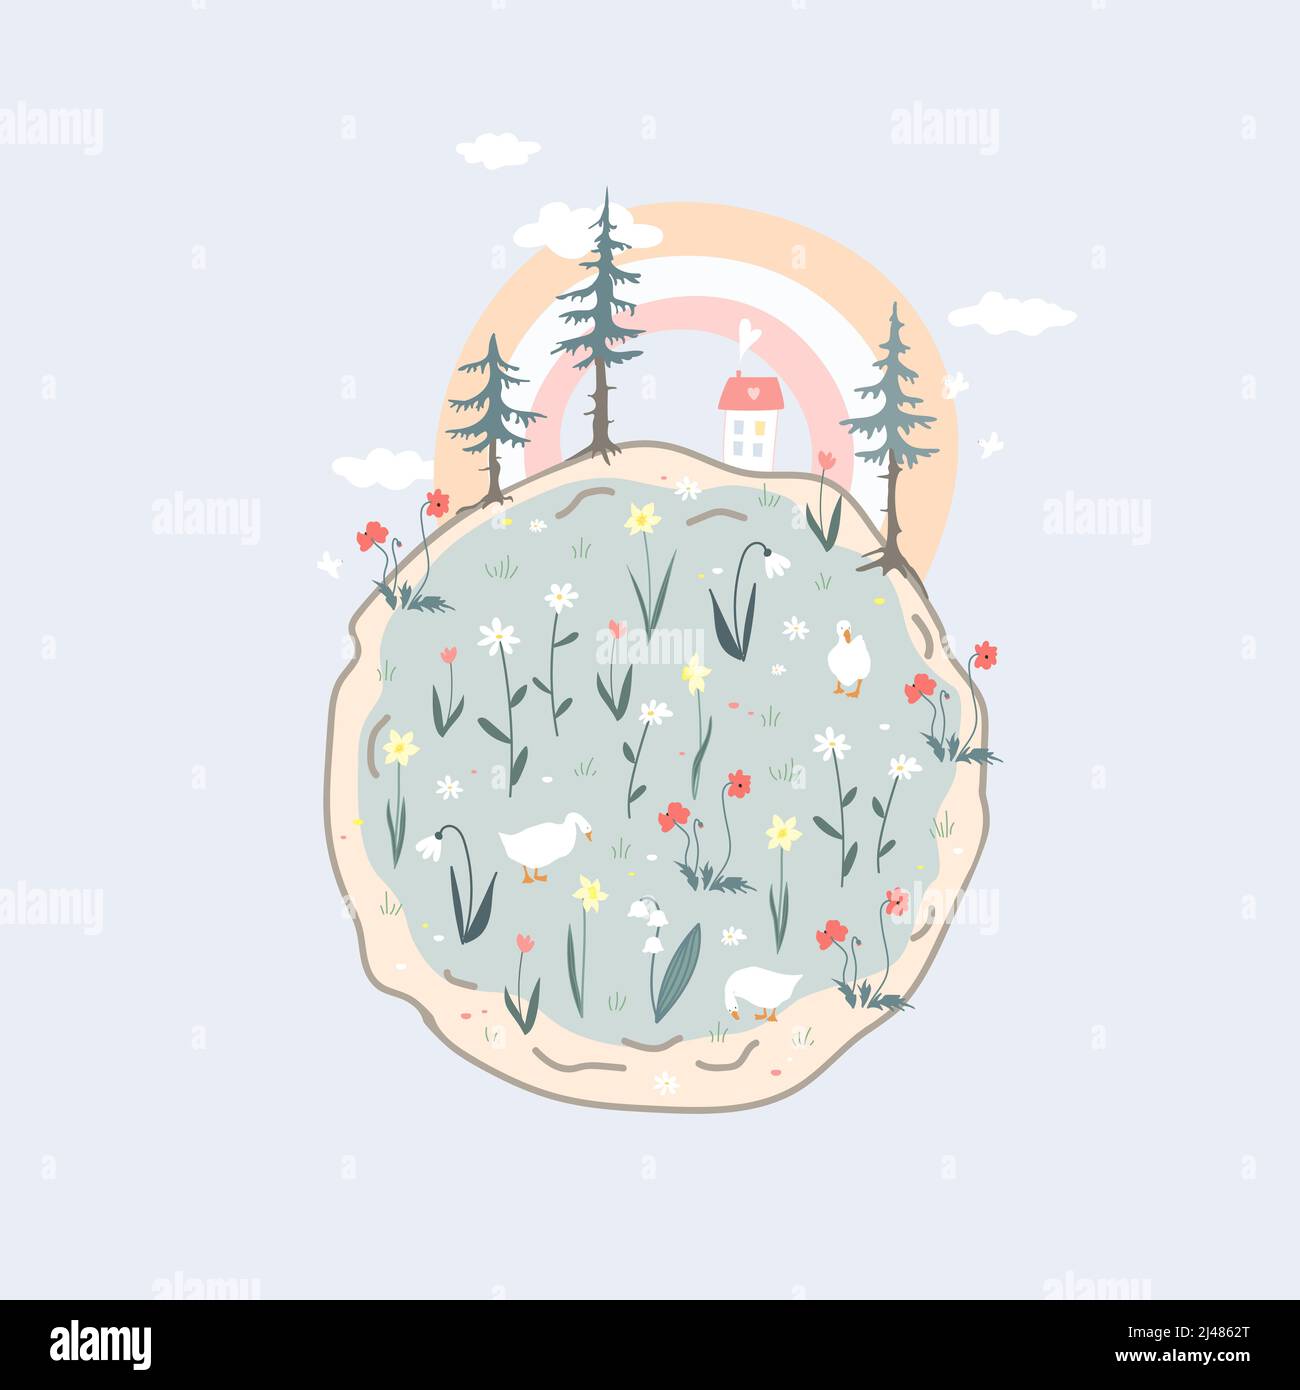 Cote round planet with spring flowers, trees and cosy house. Happy Earth day concept, clean and healthy world. Home of happiness and calmness. Flat Stock Vector